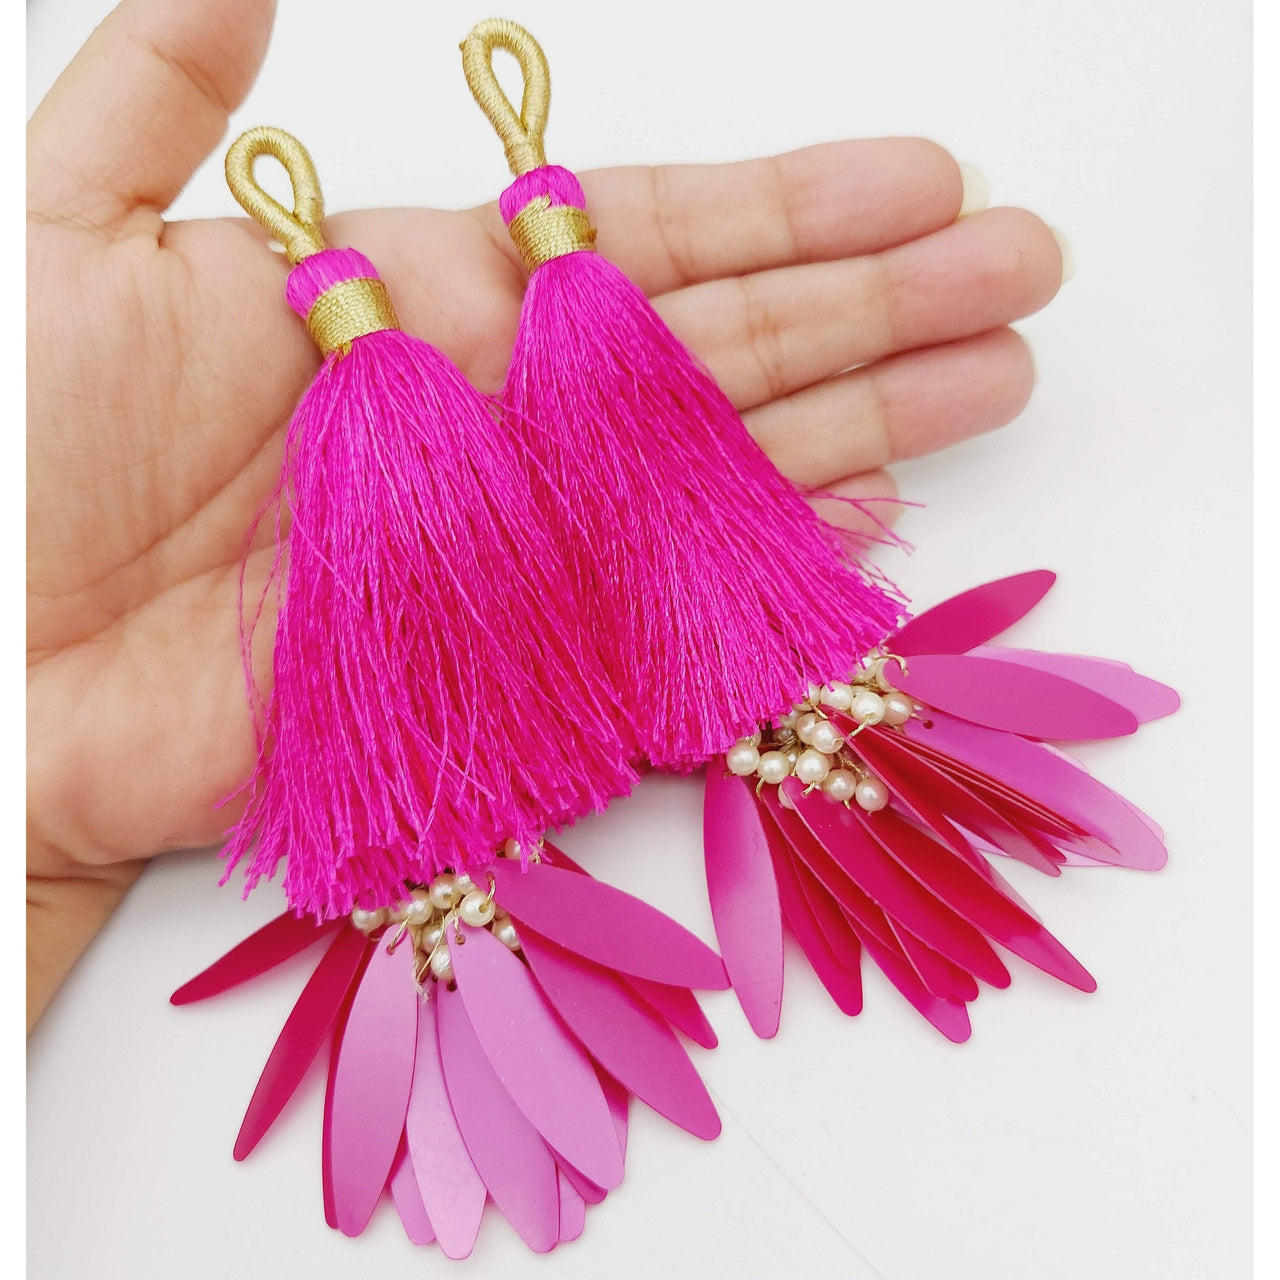 Fuchsia Pink Tassels With Long Sequins And Seed Pearl Beads, Beaded Thread Tassel Charms, 2 Pcs